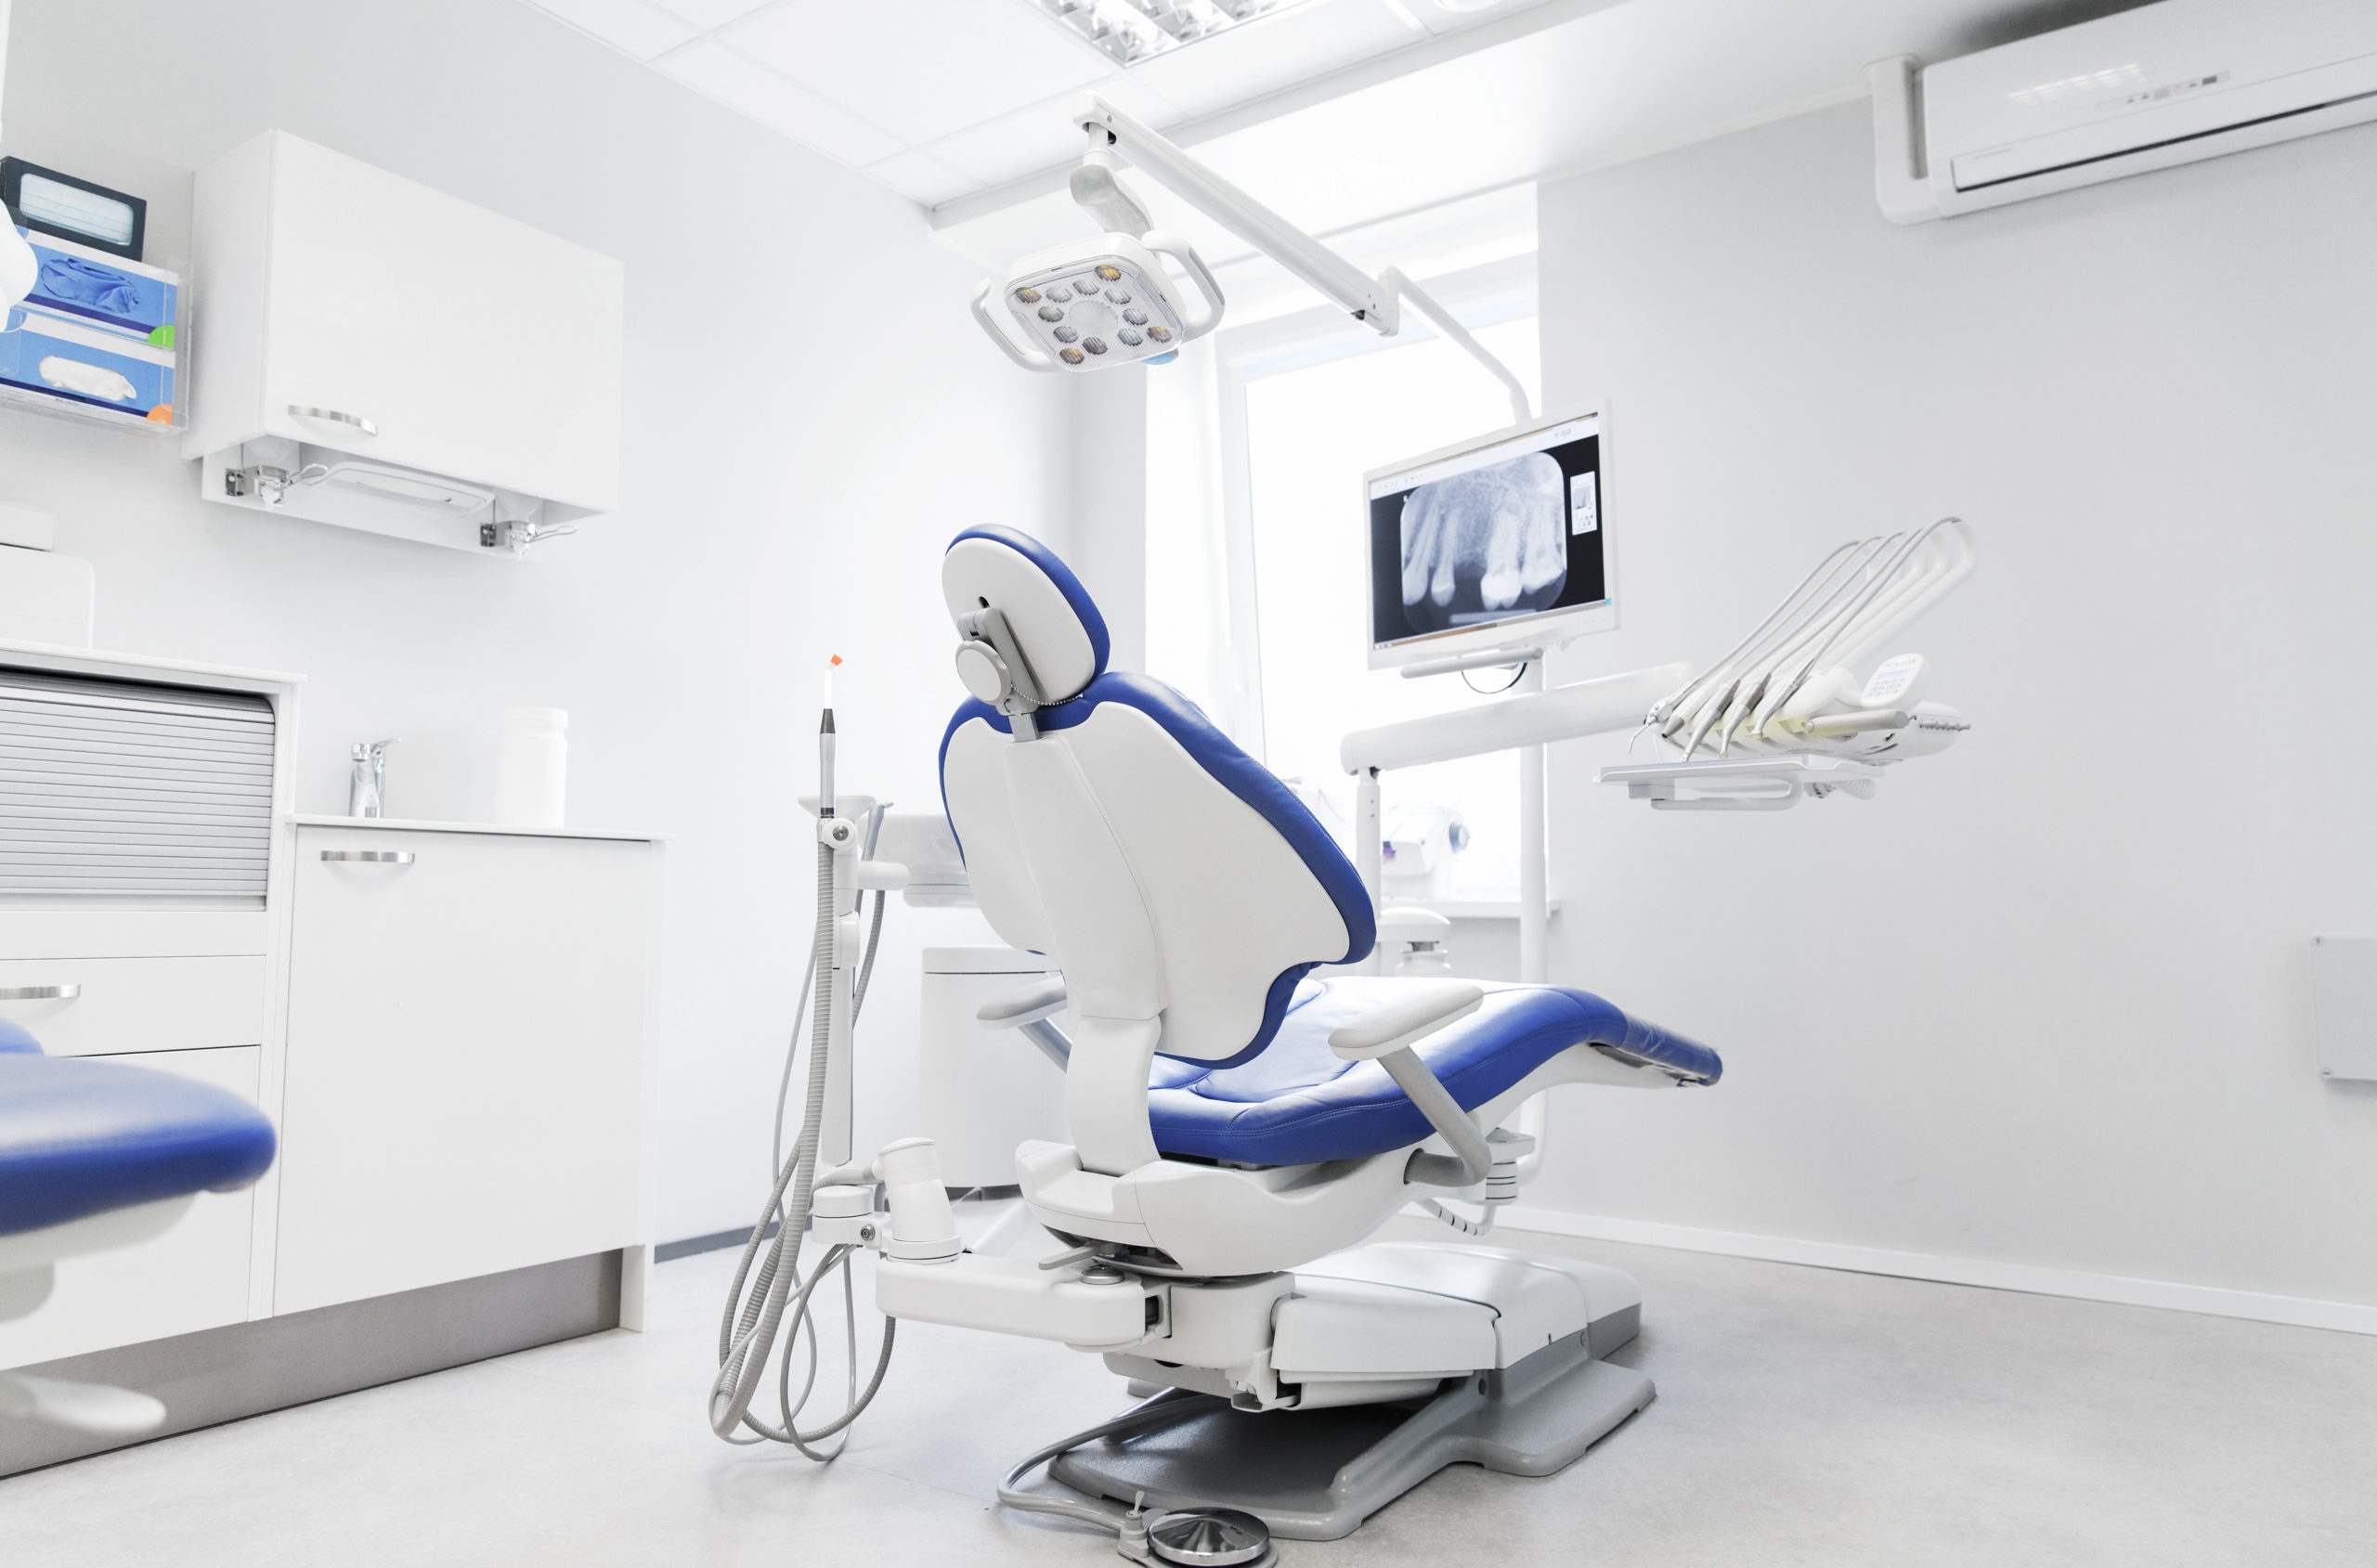 Image of Dental chair with the words IT Support Company HIPAA Compliance